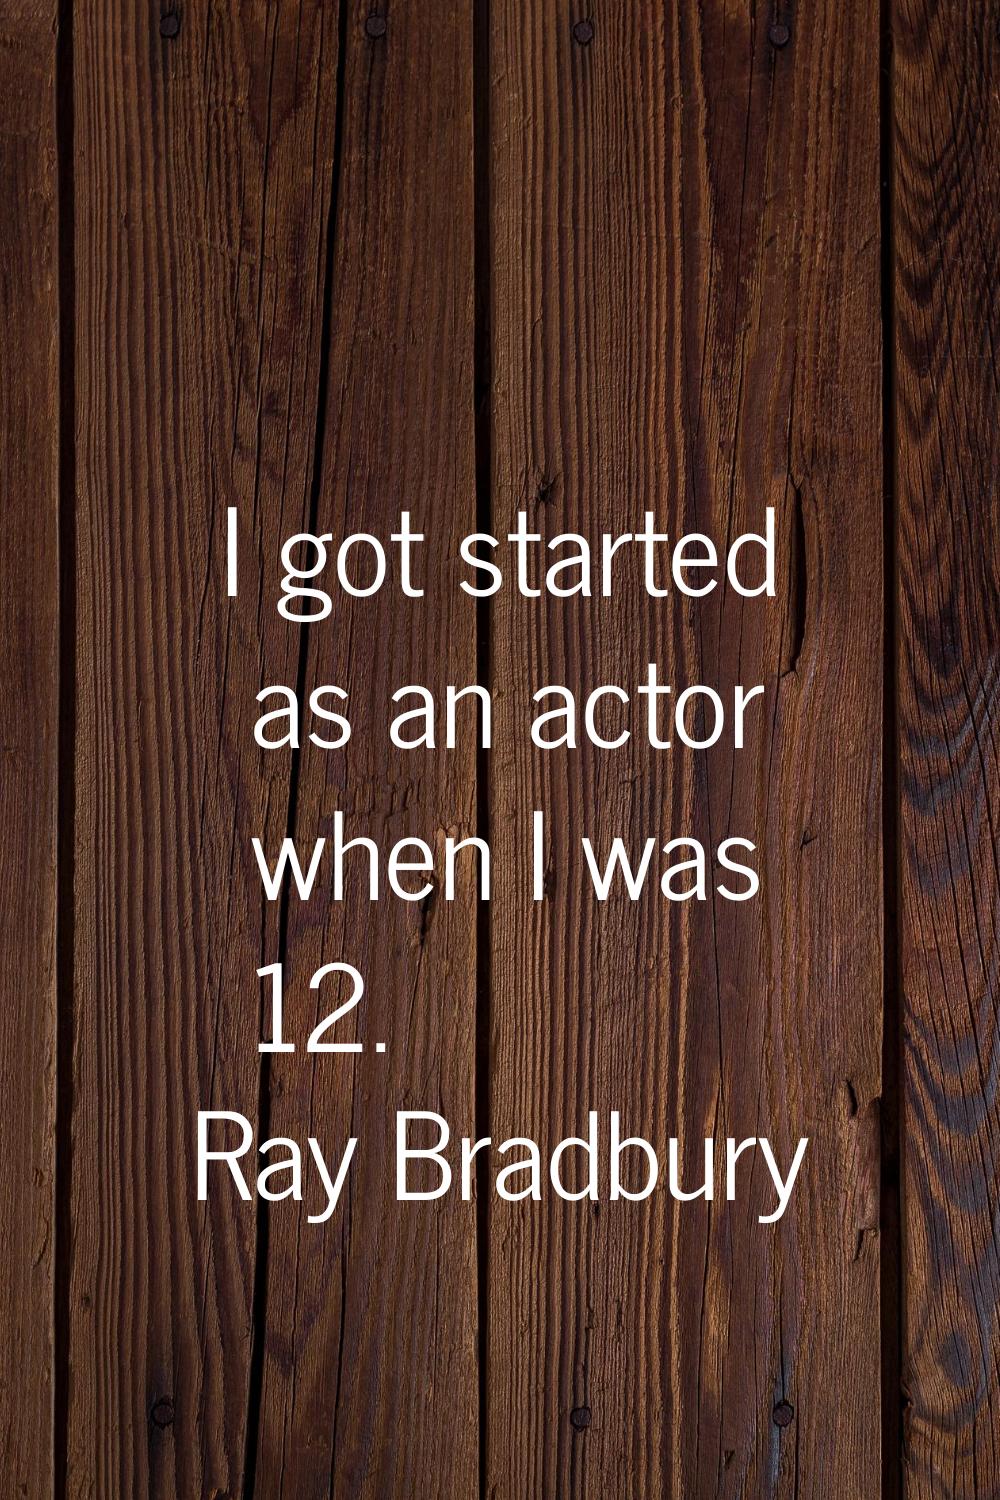 I got started as an actor when I was 12.